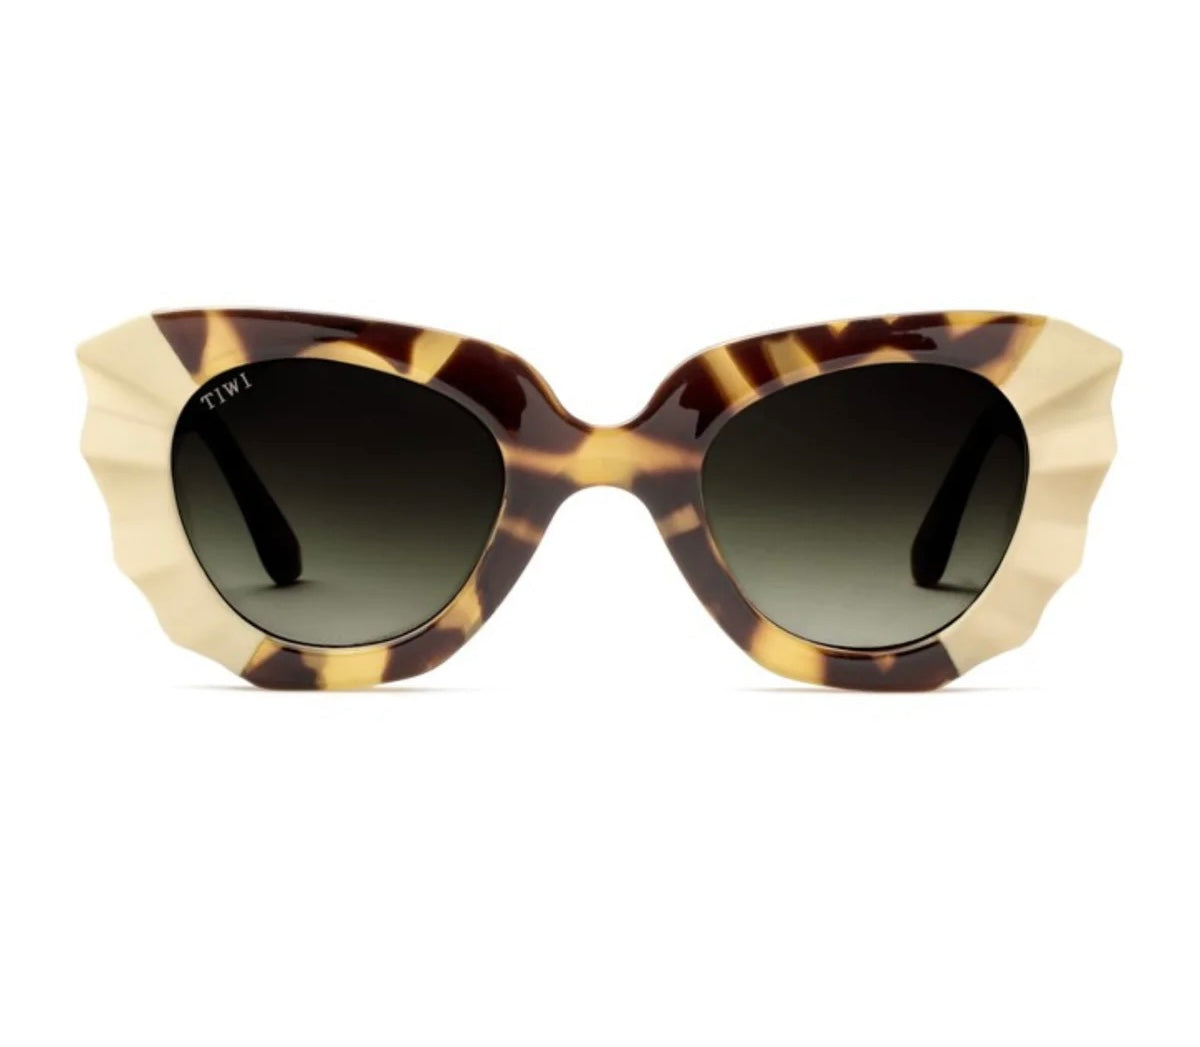 MATISSE Sunglasses Available in more colors Tortoise/Beige  